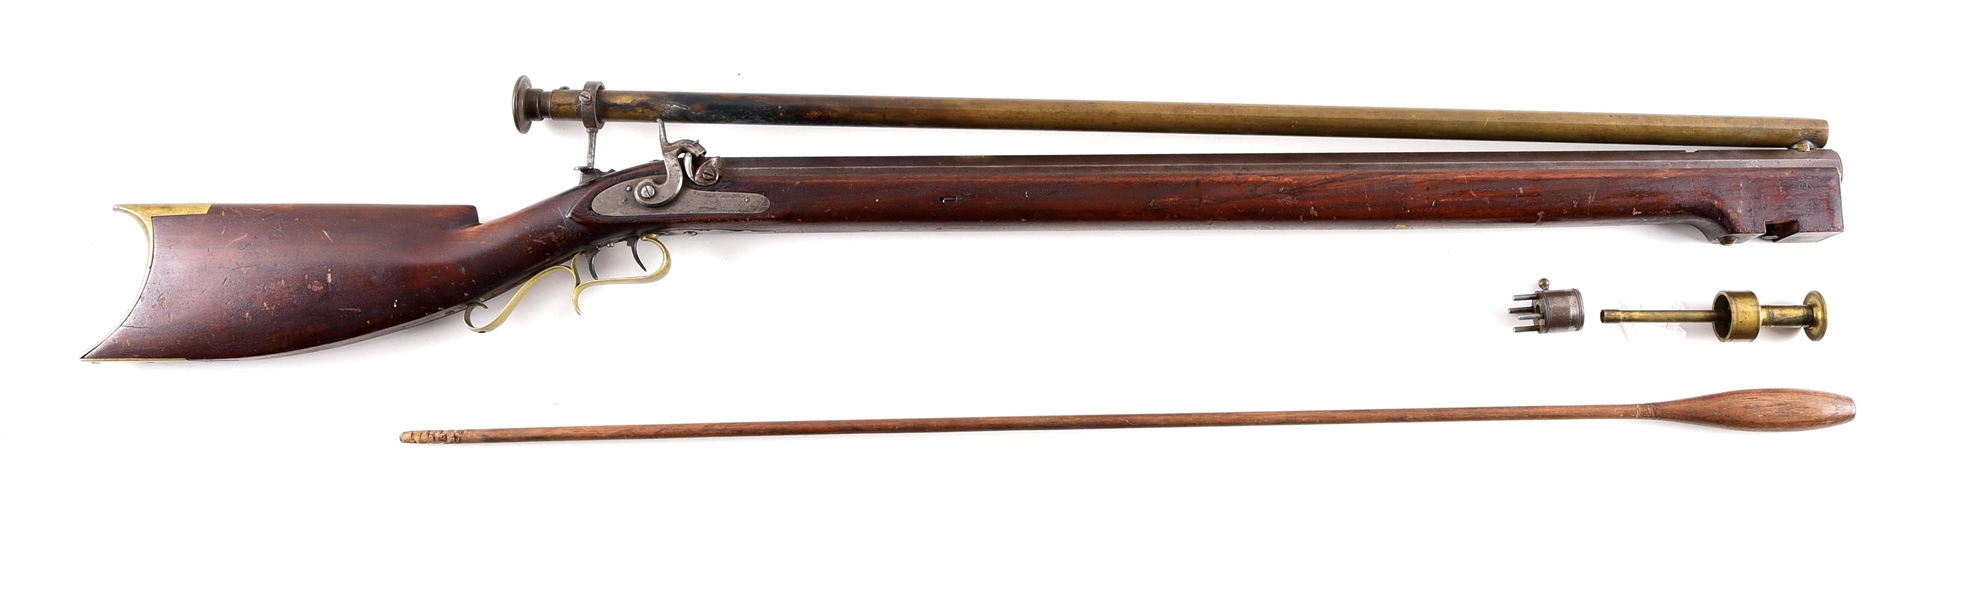 (A) GEORGE SCHALK PERCUSSION TARGET RIFLE WITH BRASS SIGHT TUBE.